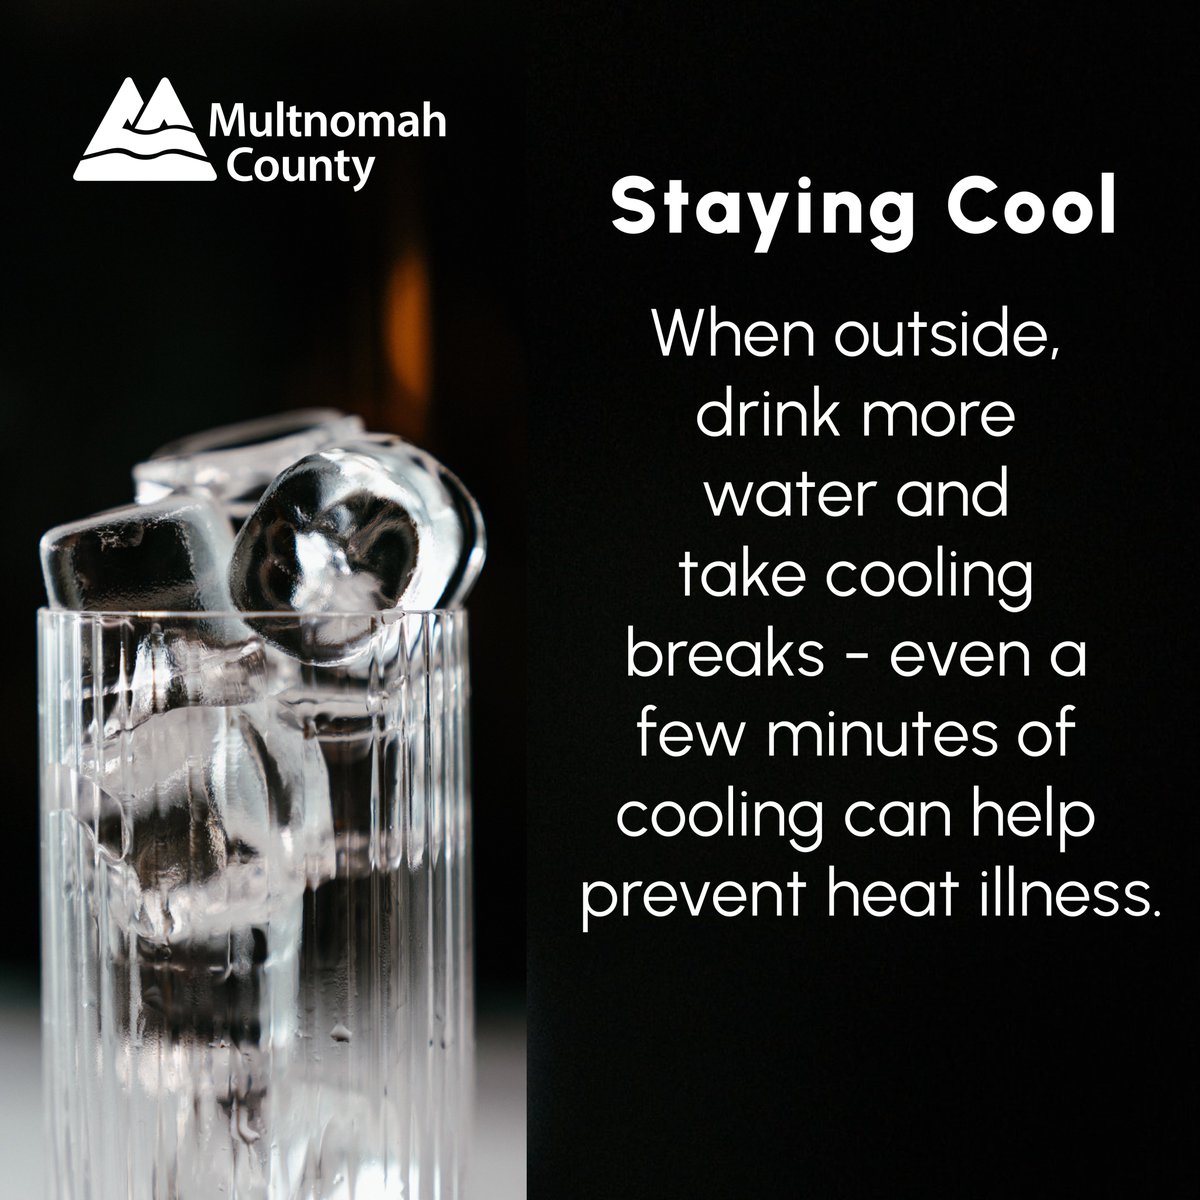 🌞It’s possible we may experience temps as high as the 90’s today, Friday, May 10. Our bodies take time to adjust to heat and may not be acclimated so early in the season. Heat illness can happen to anyone. Watch out for symptoms in ourselves and other: multco.us/hot